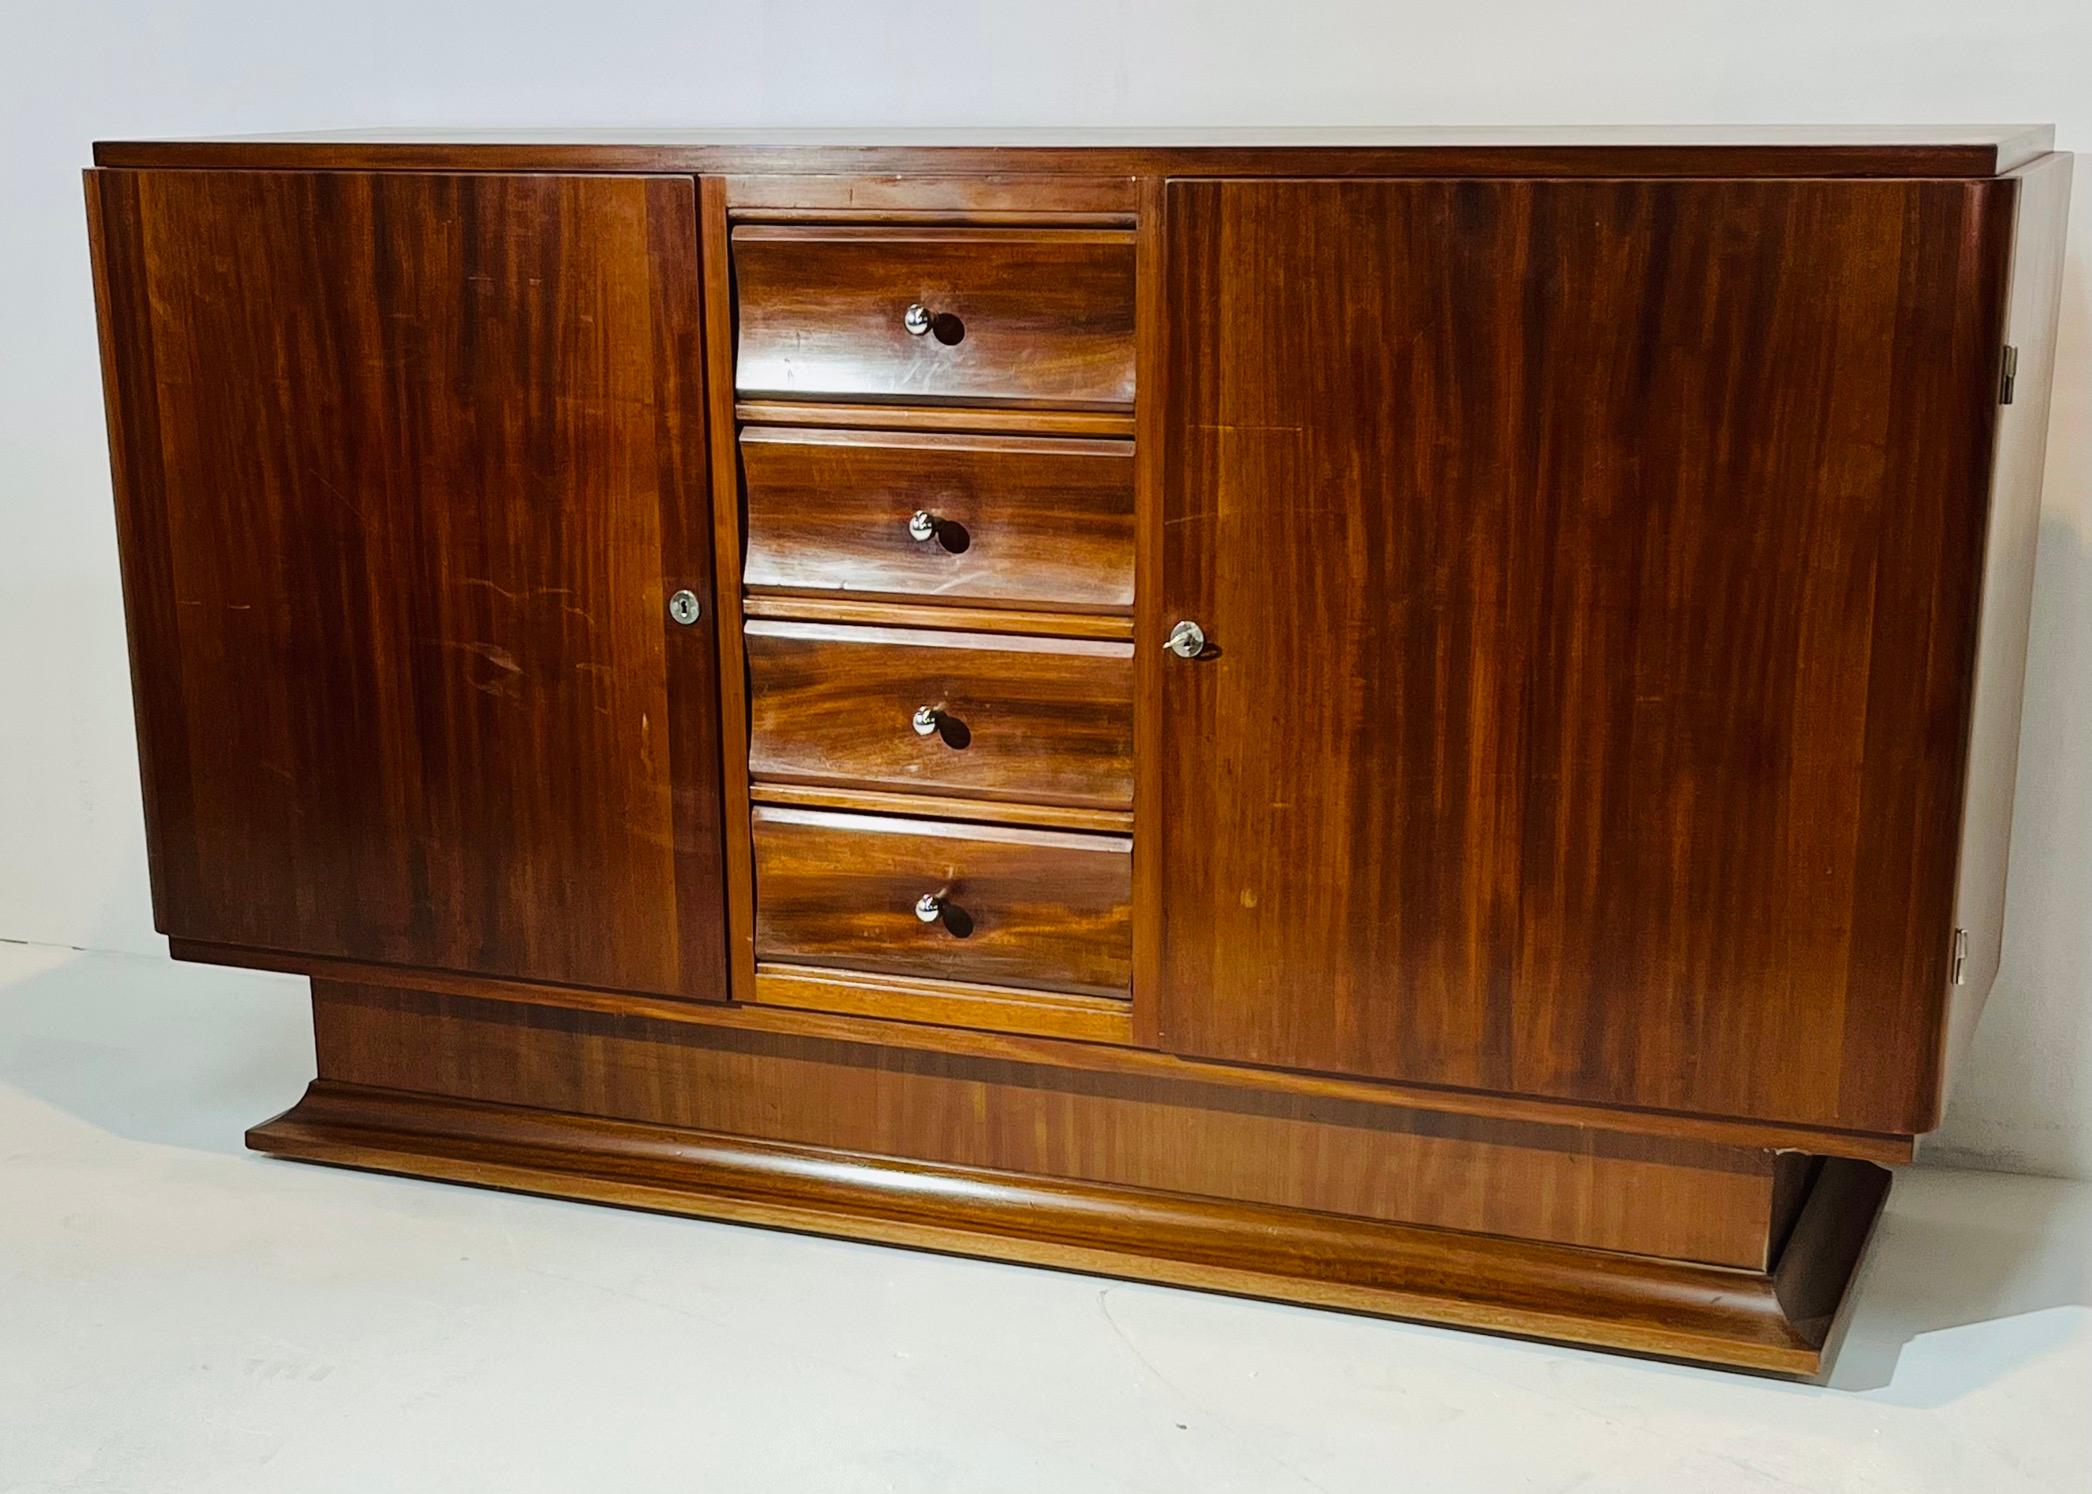 Well balanced design for this side board in solid mahogany with four drawers in the center ( the four handles have been changed ).
The piece is standing on an elegant base.
Two side doors opening on shelves.
Interesting size and design to fit in